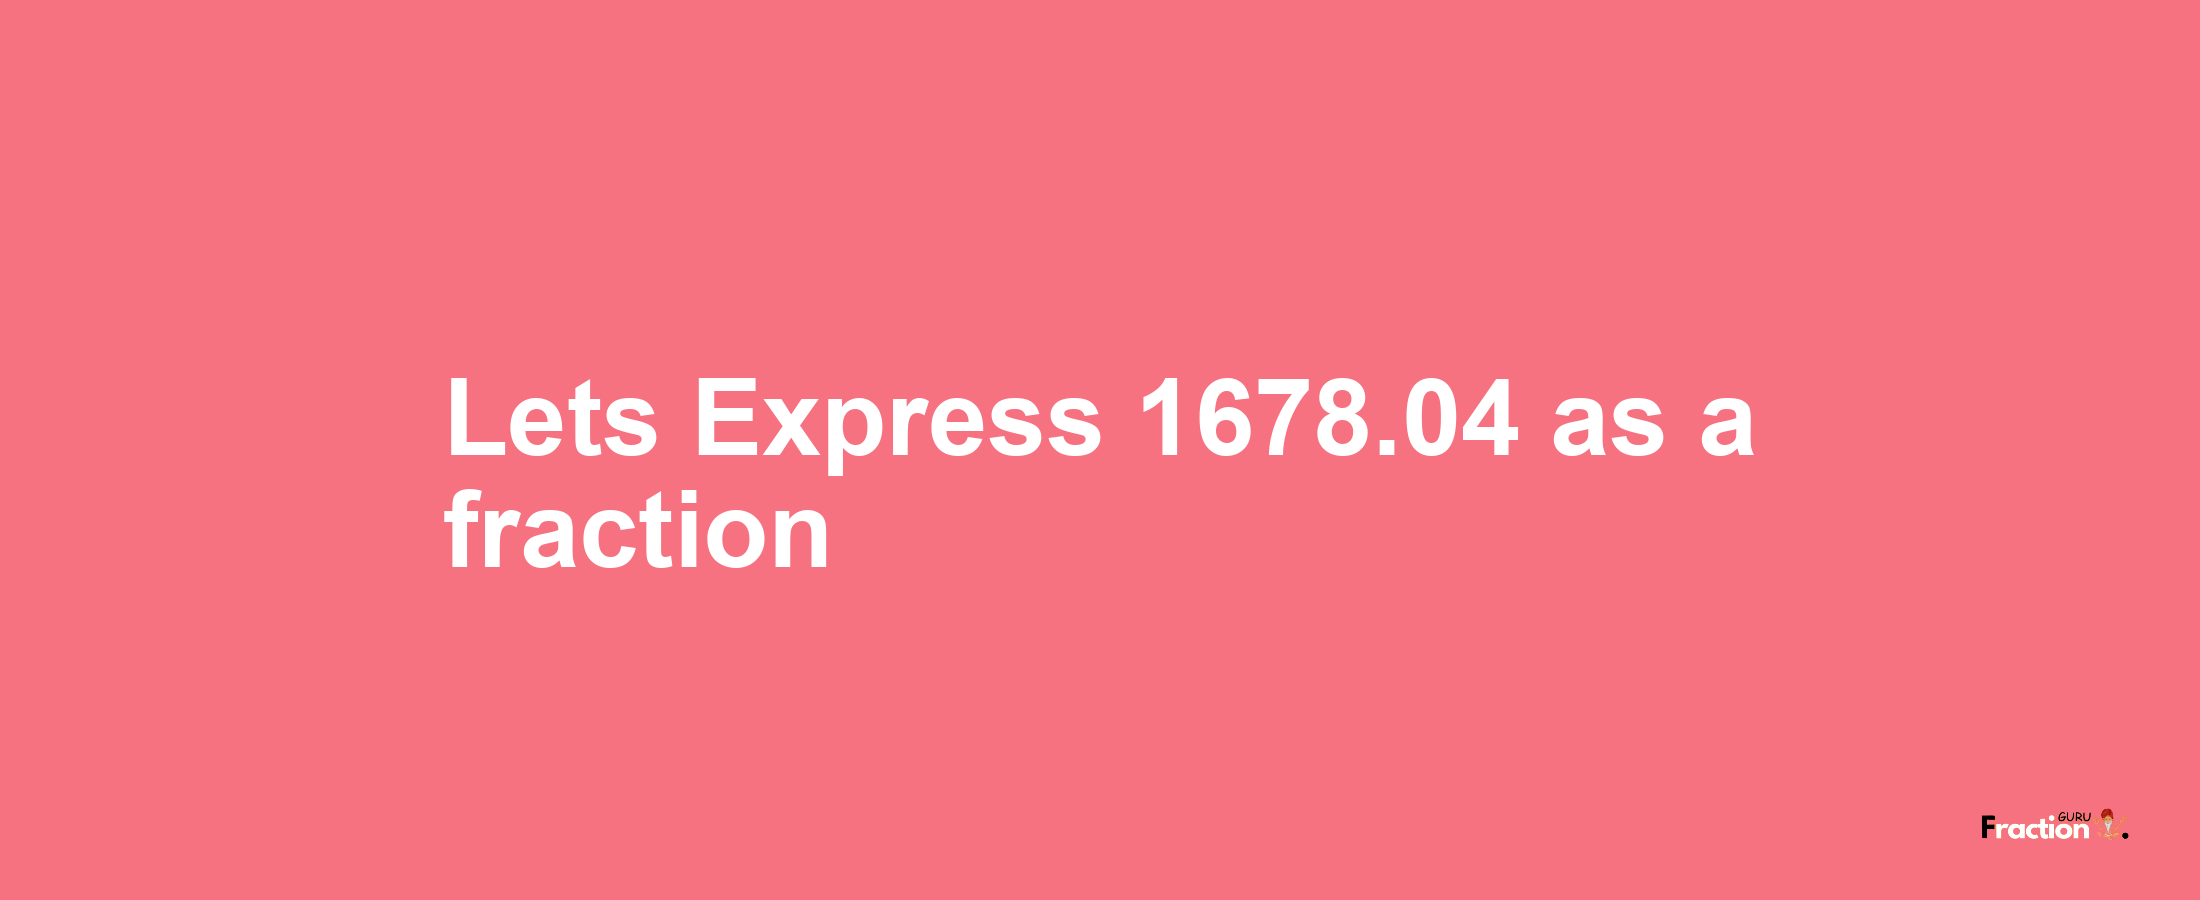 Lets Express 1678.04 as afraction